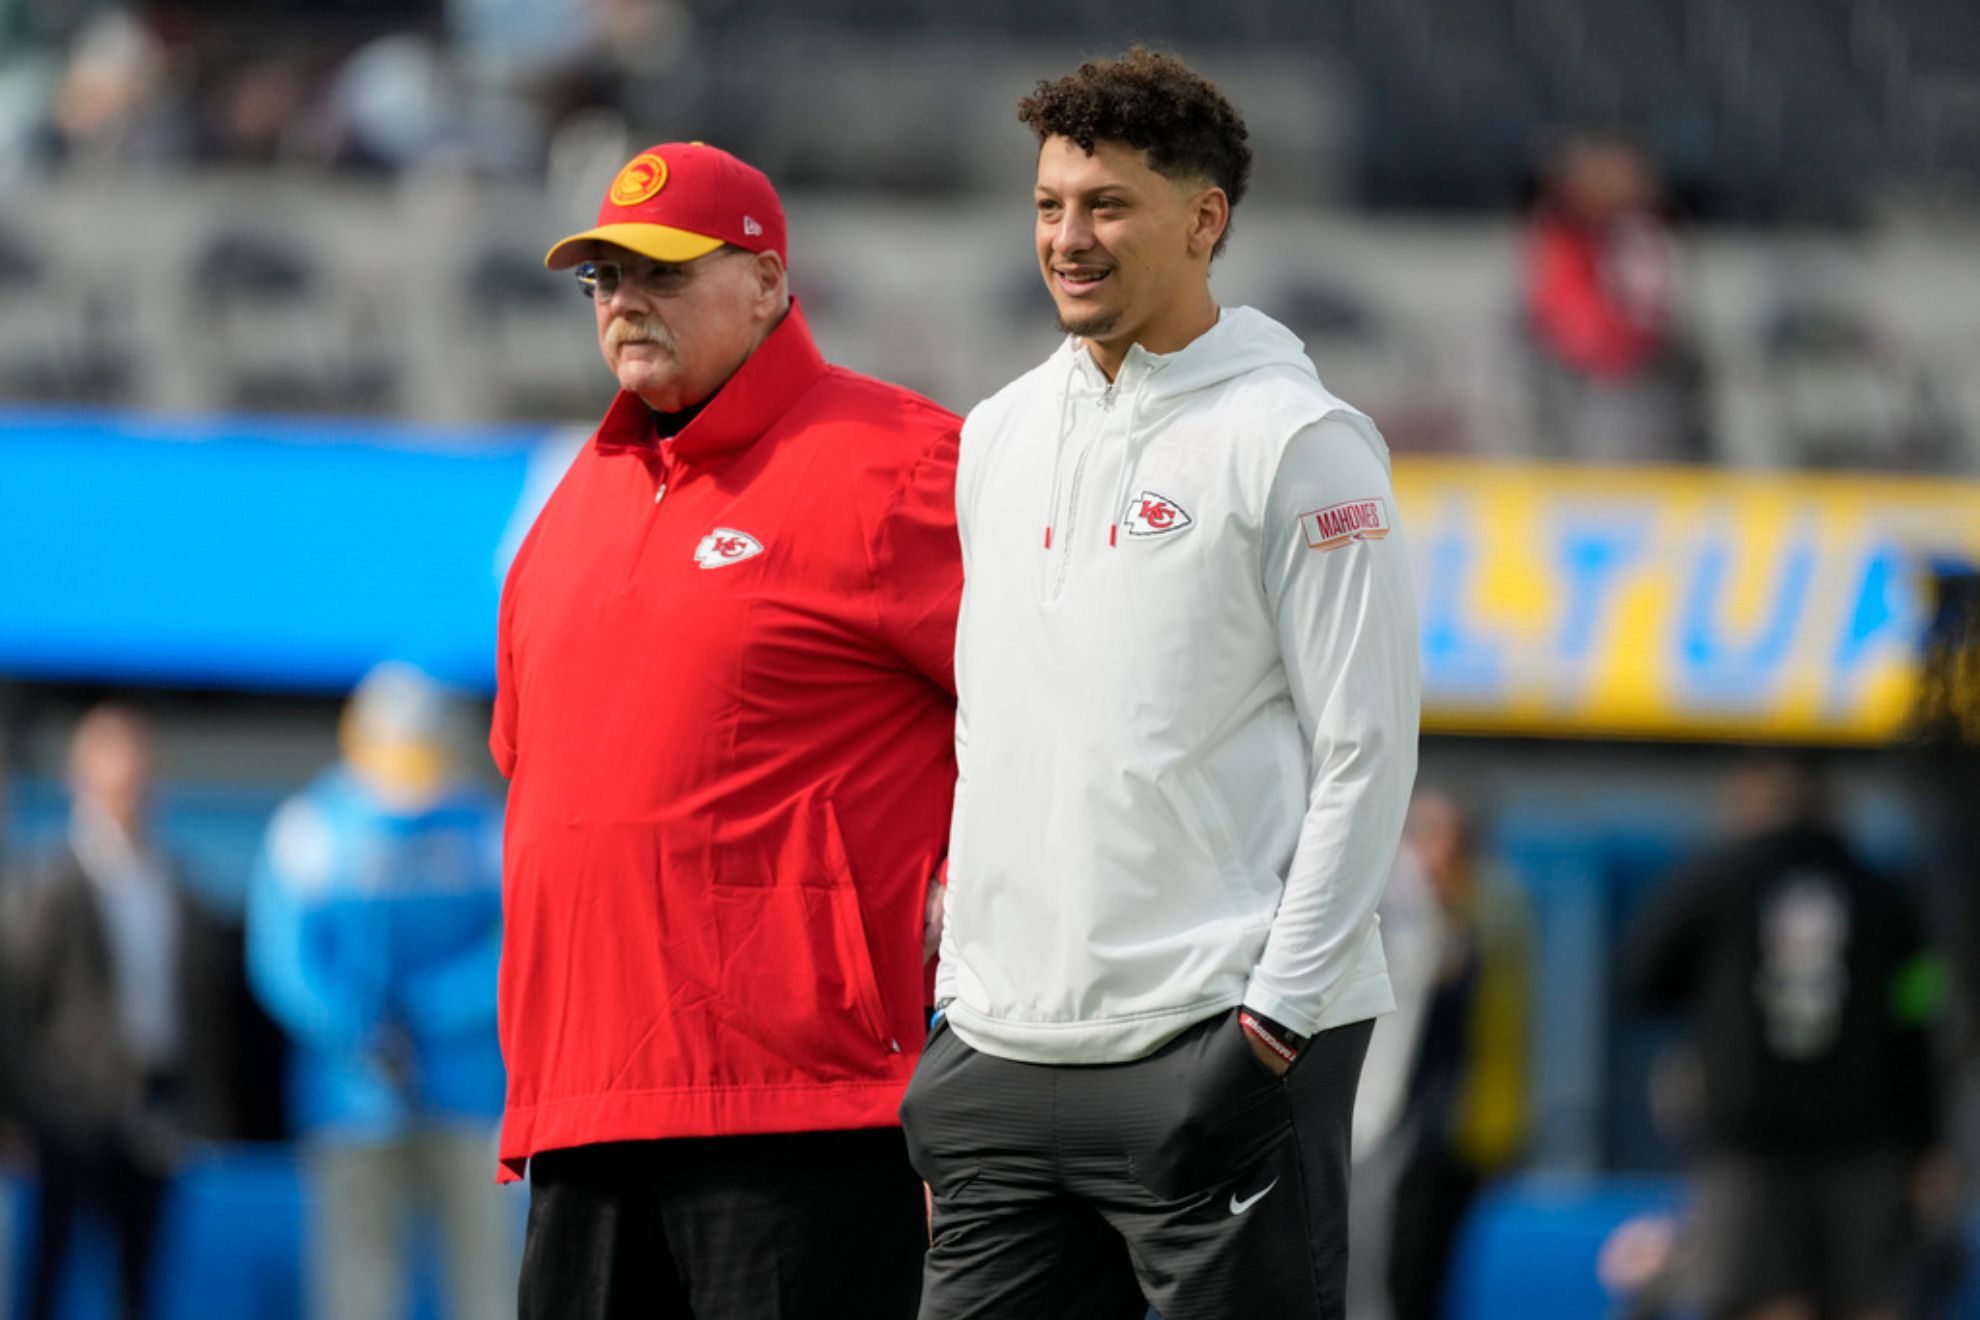 Mahomes and Andy Reid are sticking together for the long haul